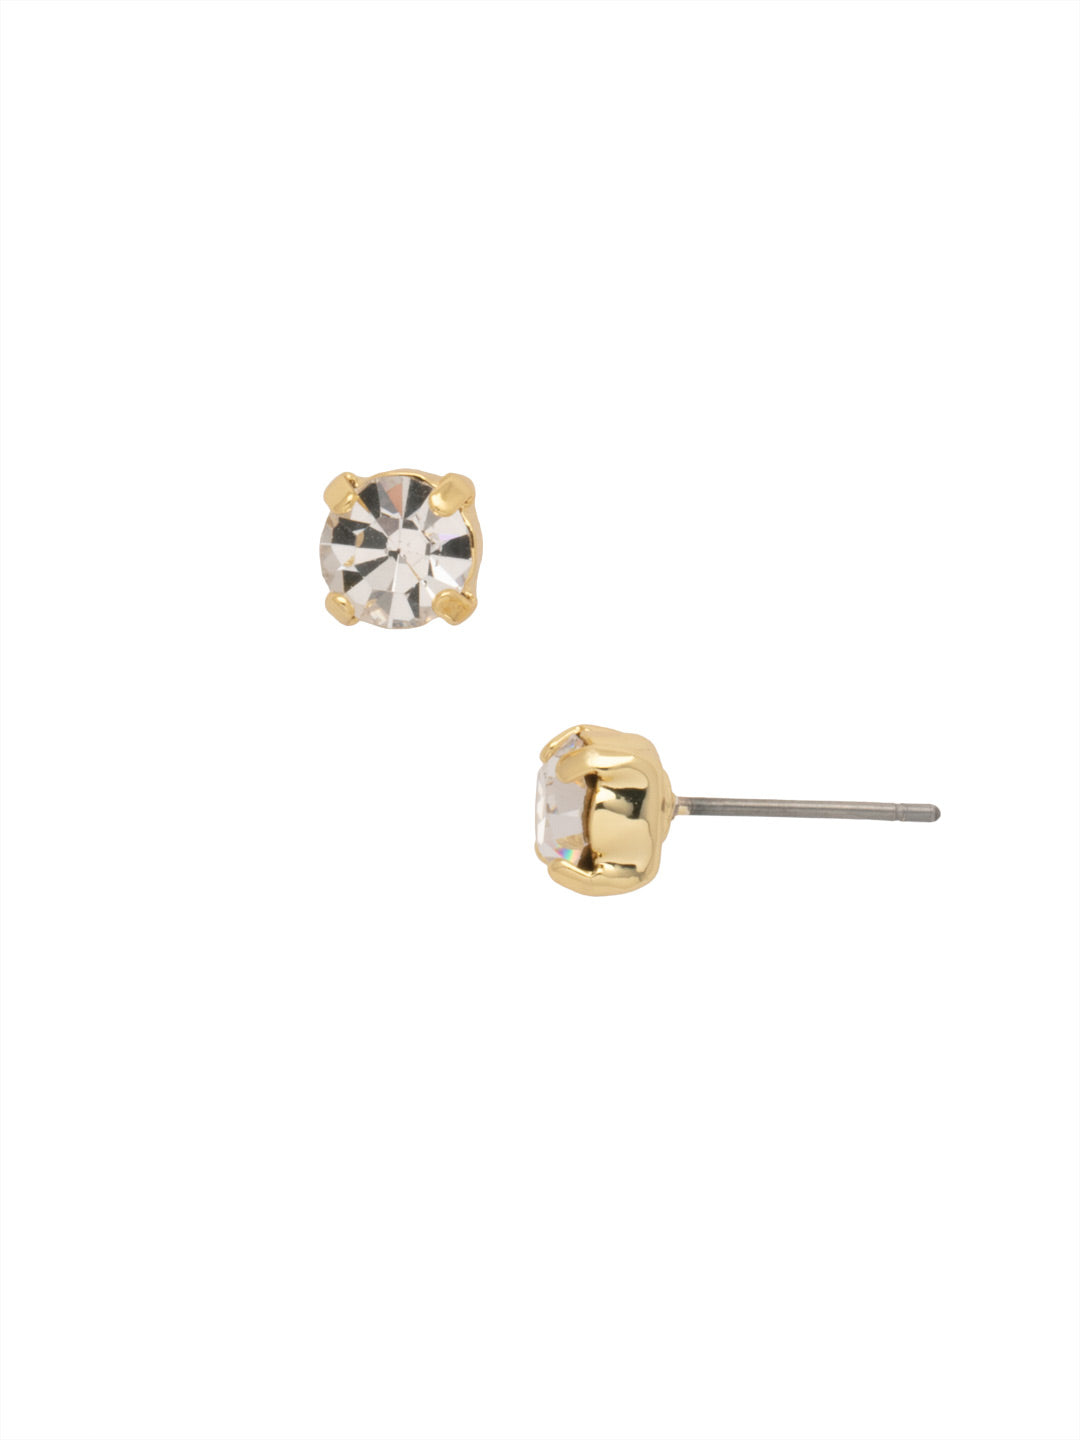 Jayda Stud Earrings - 8EA13BGCRY - <p>The Jayda Stud Earrings are the perfect every day wardrobe staple. A round crystal nestles perfectly in a metal plated post with four prongs. Need help picking a stud? <a href="https://www.sorrelli.com/blogs/sisterhood/round-stud-earrings-101-a-rundown-of-sizes-styles-and-sparkle">Check out our size guide!</a> From Sorrelli's Crystal collection in our Bright Gold-tone finish.</p>